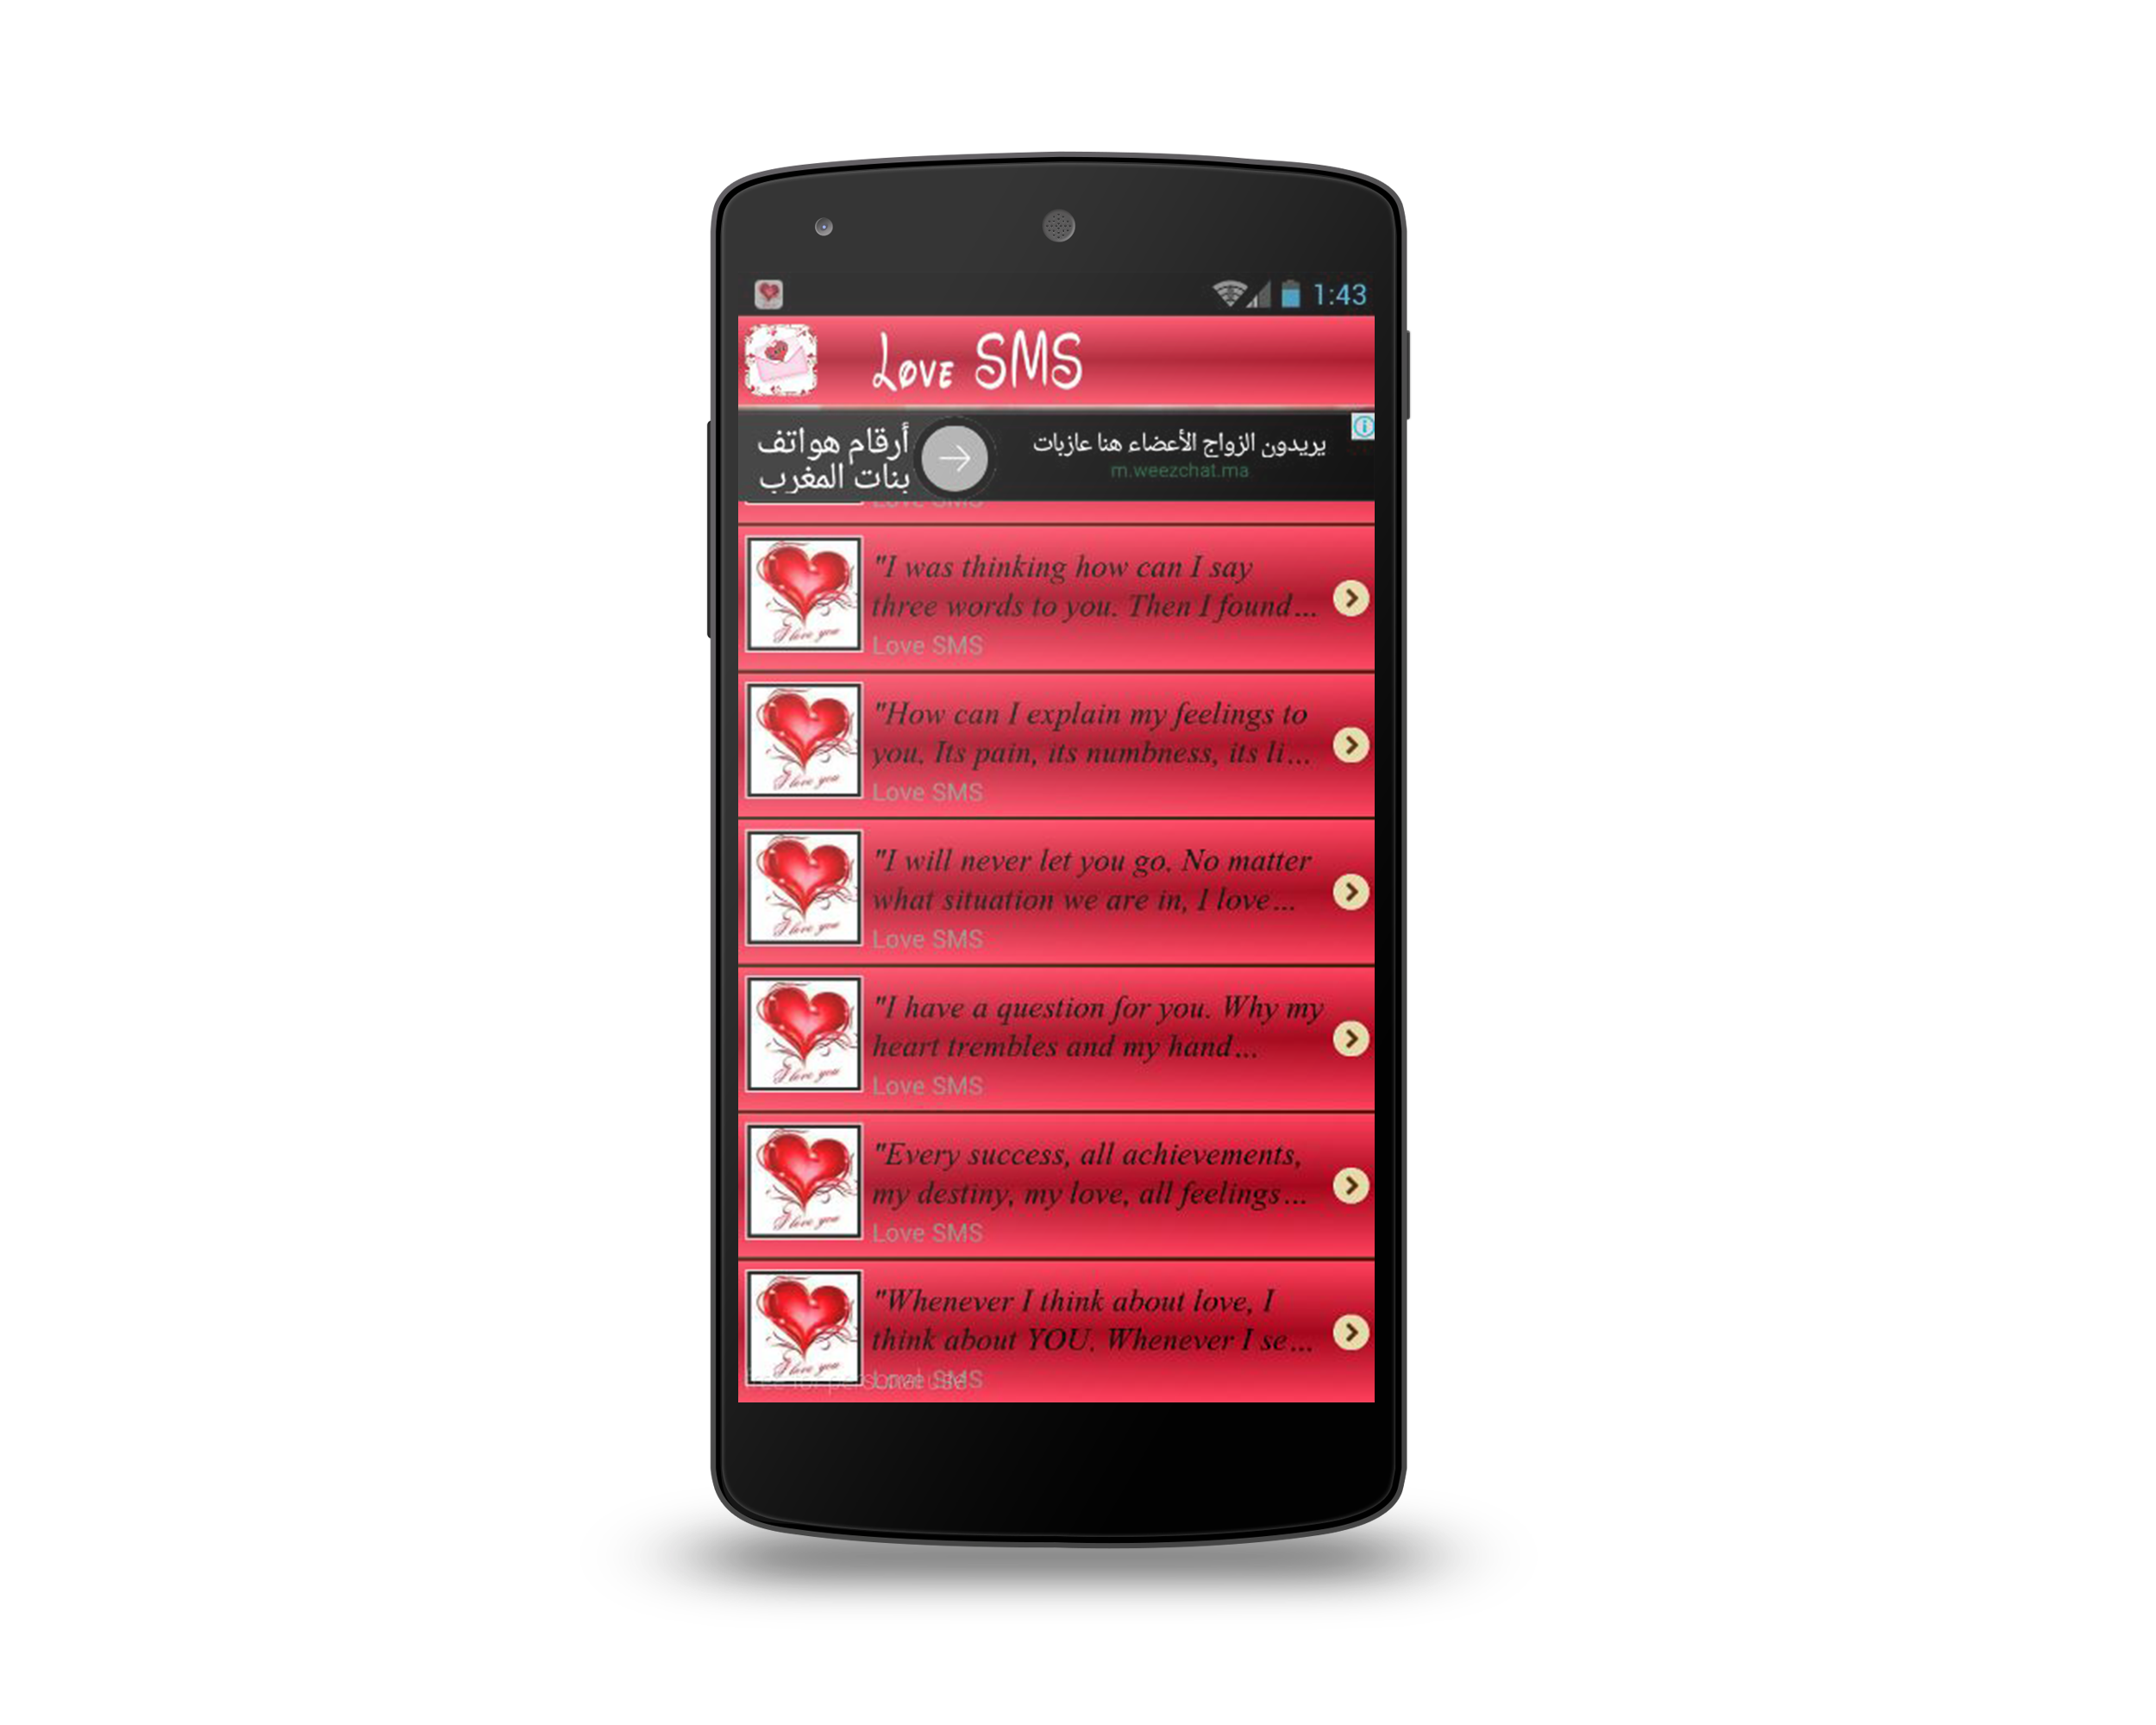 Android application Best love messages 2016 screenshort